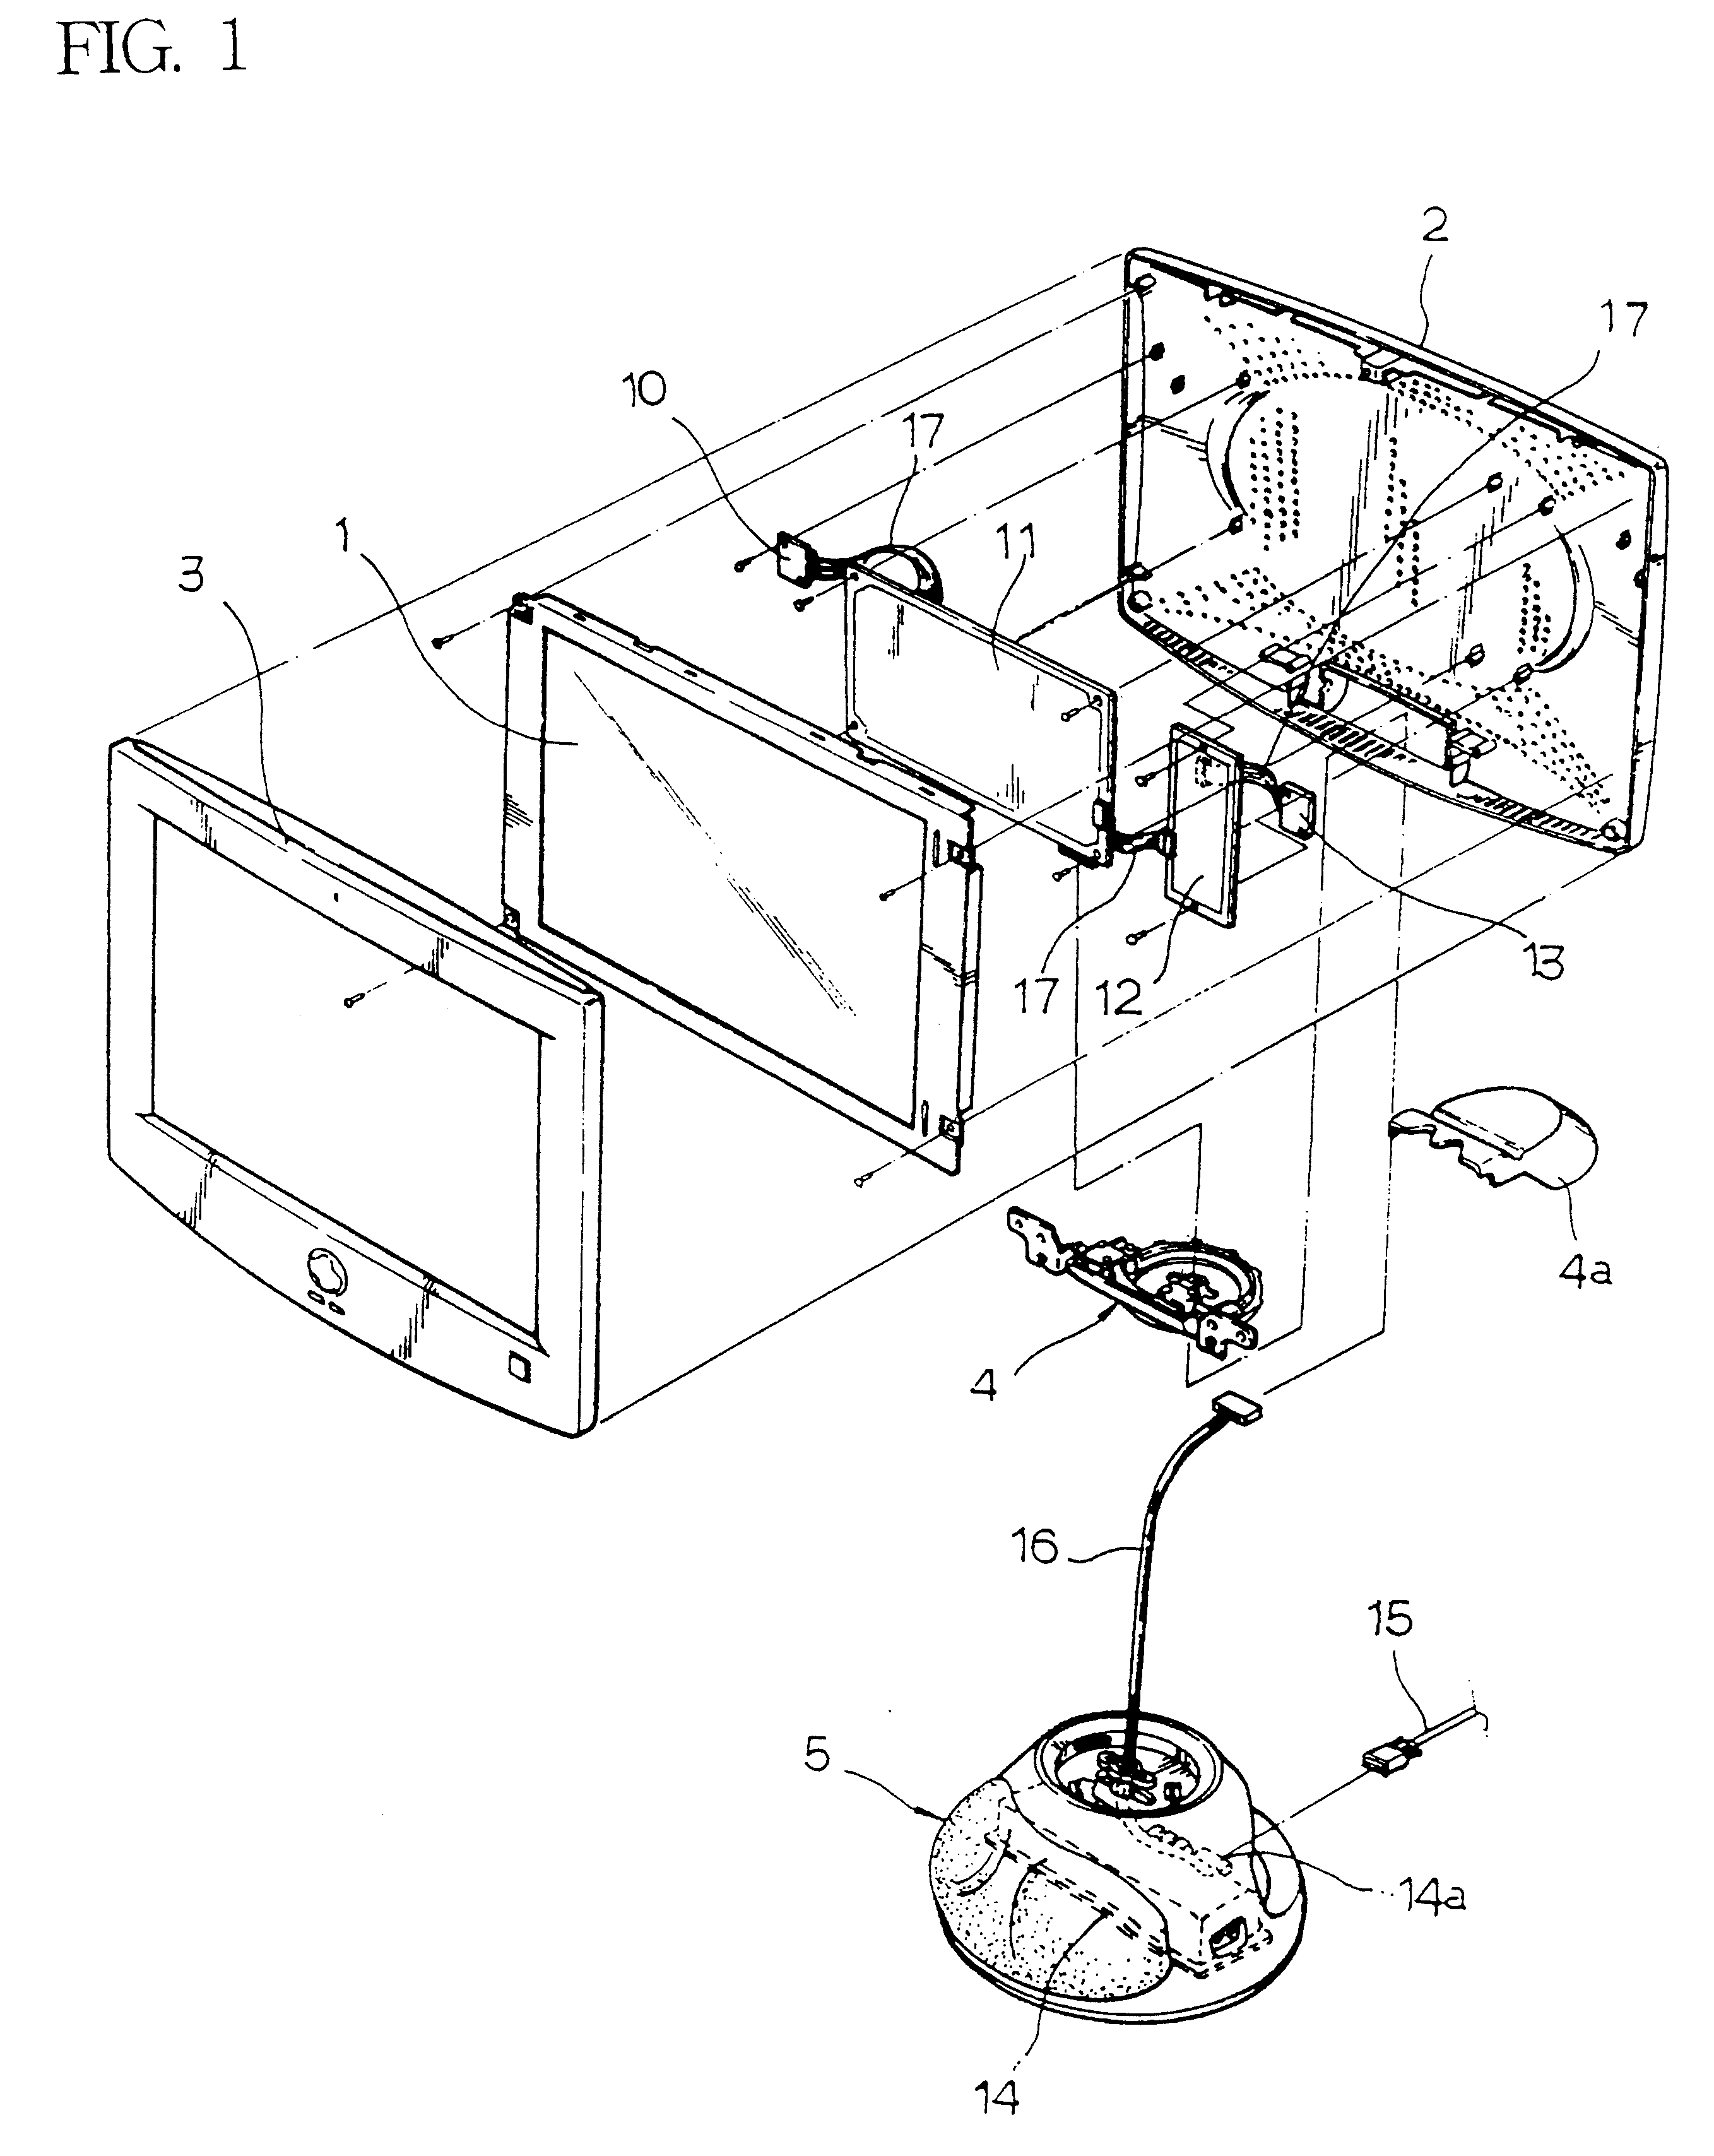 LCD monitor having partitioned circuit section